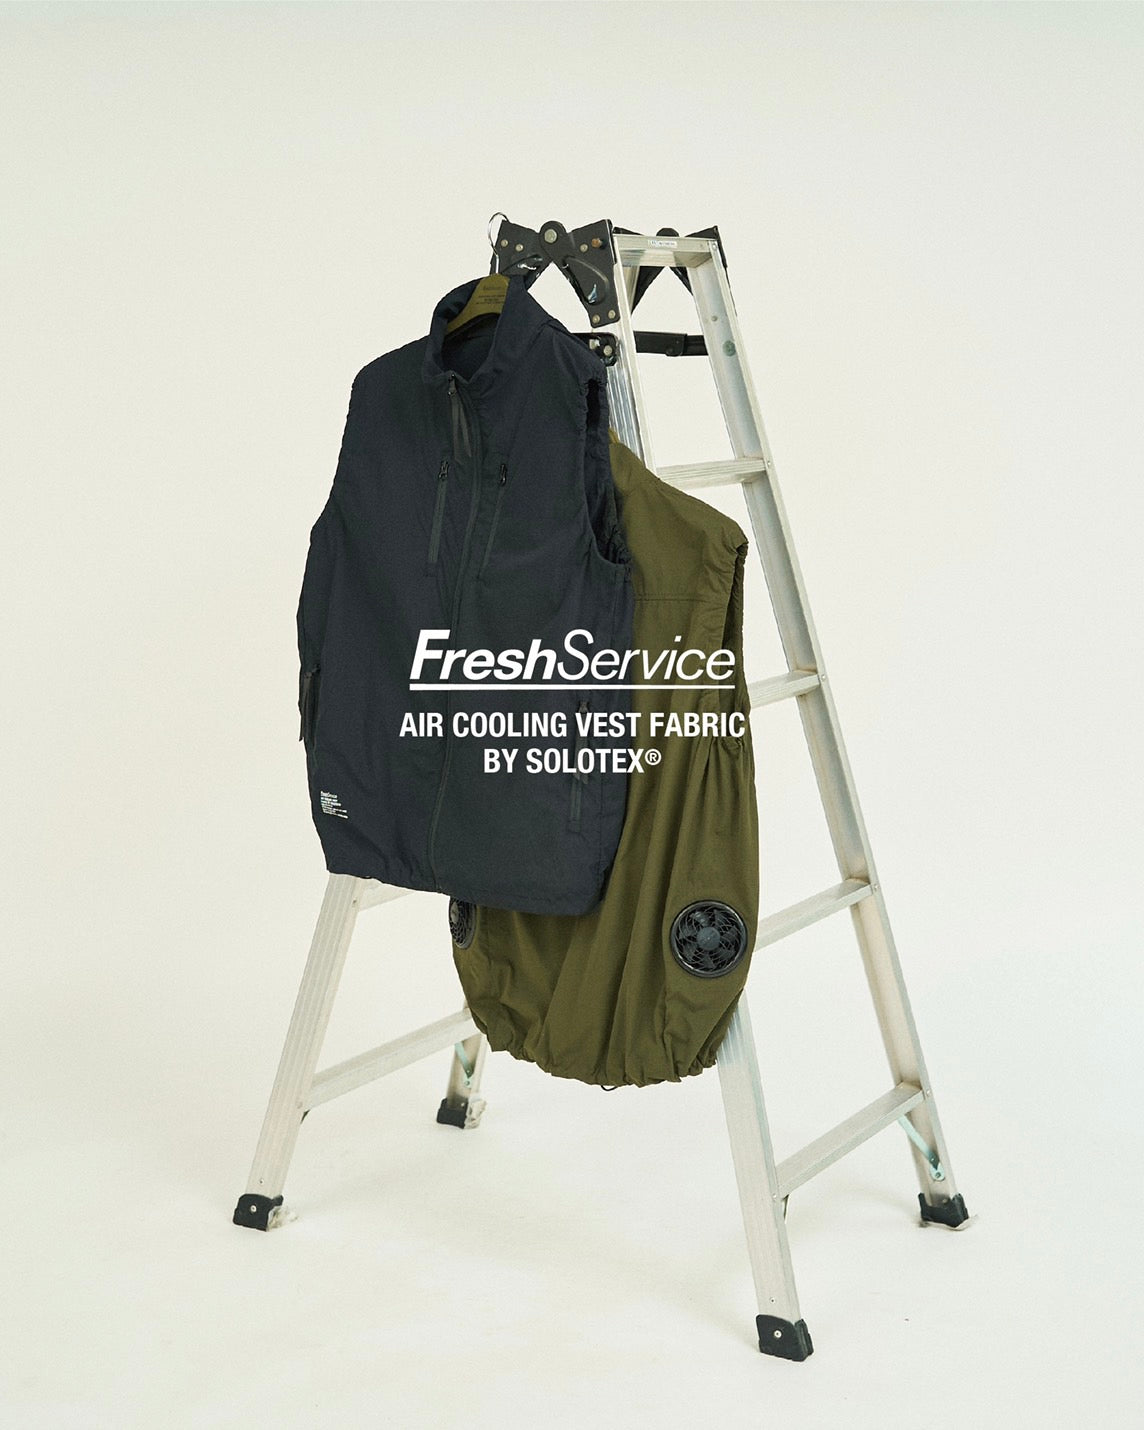 AIR COOLING VEST FABRIC BY SOLOTEX® 発売開始のお知らせ – FreshService® official site